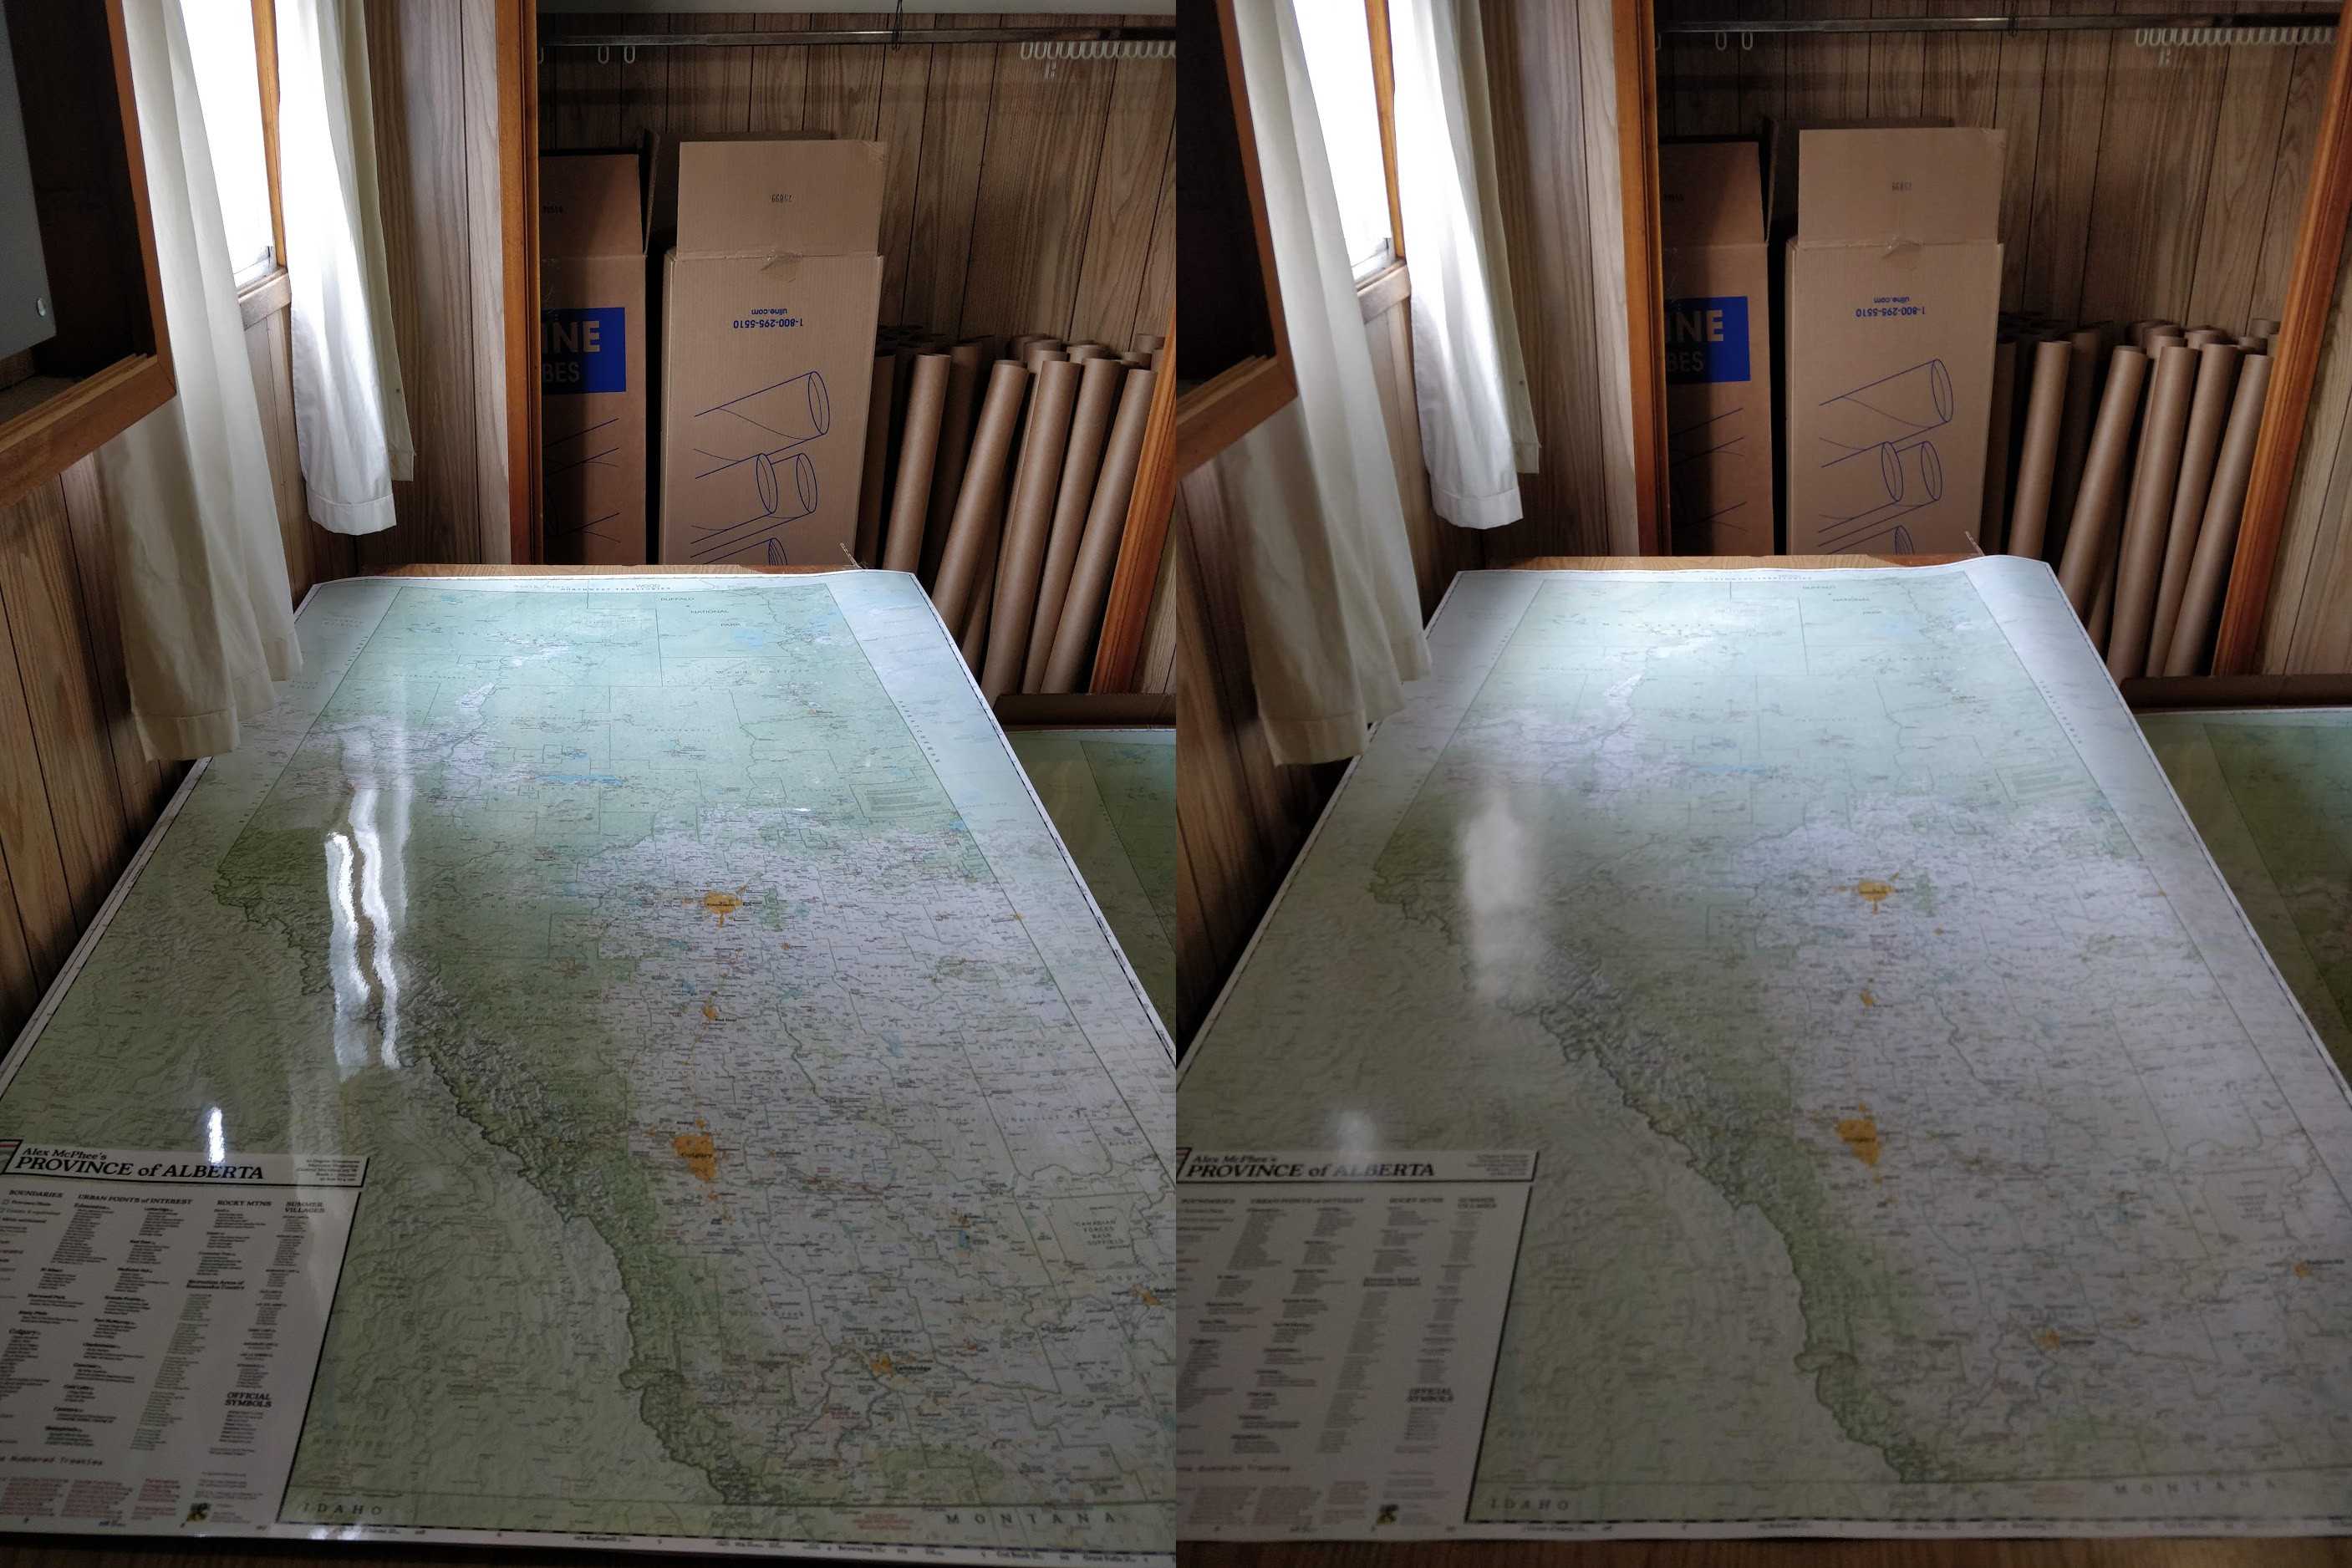 Comparison between a laminated and unlaminated copy of the map.